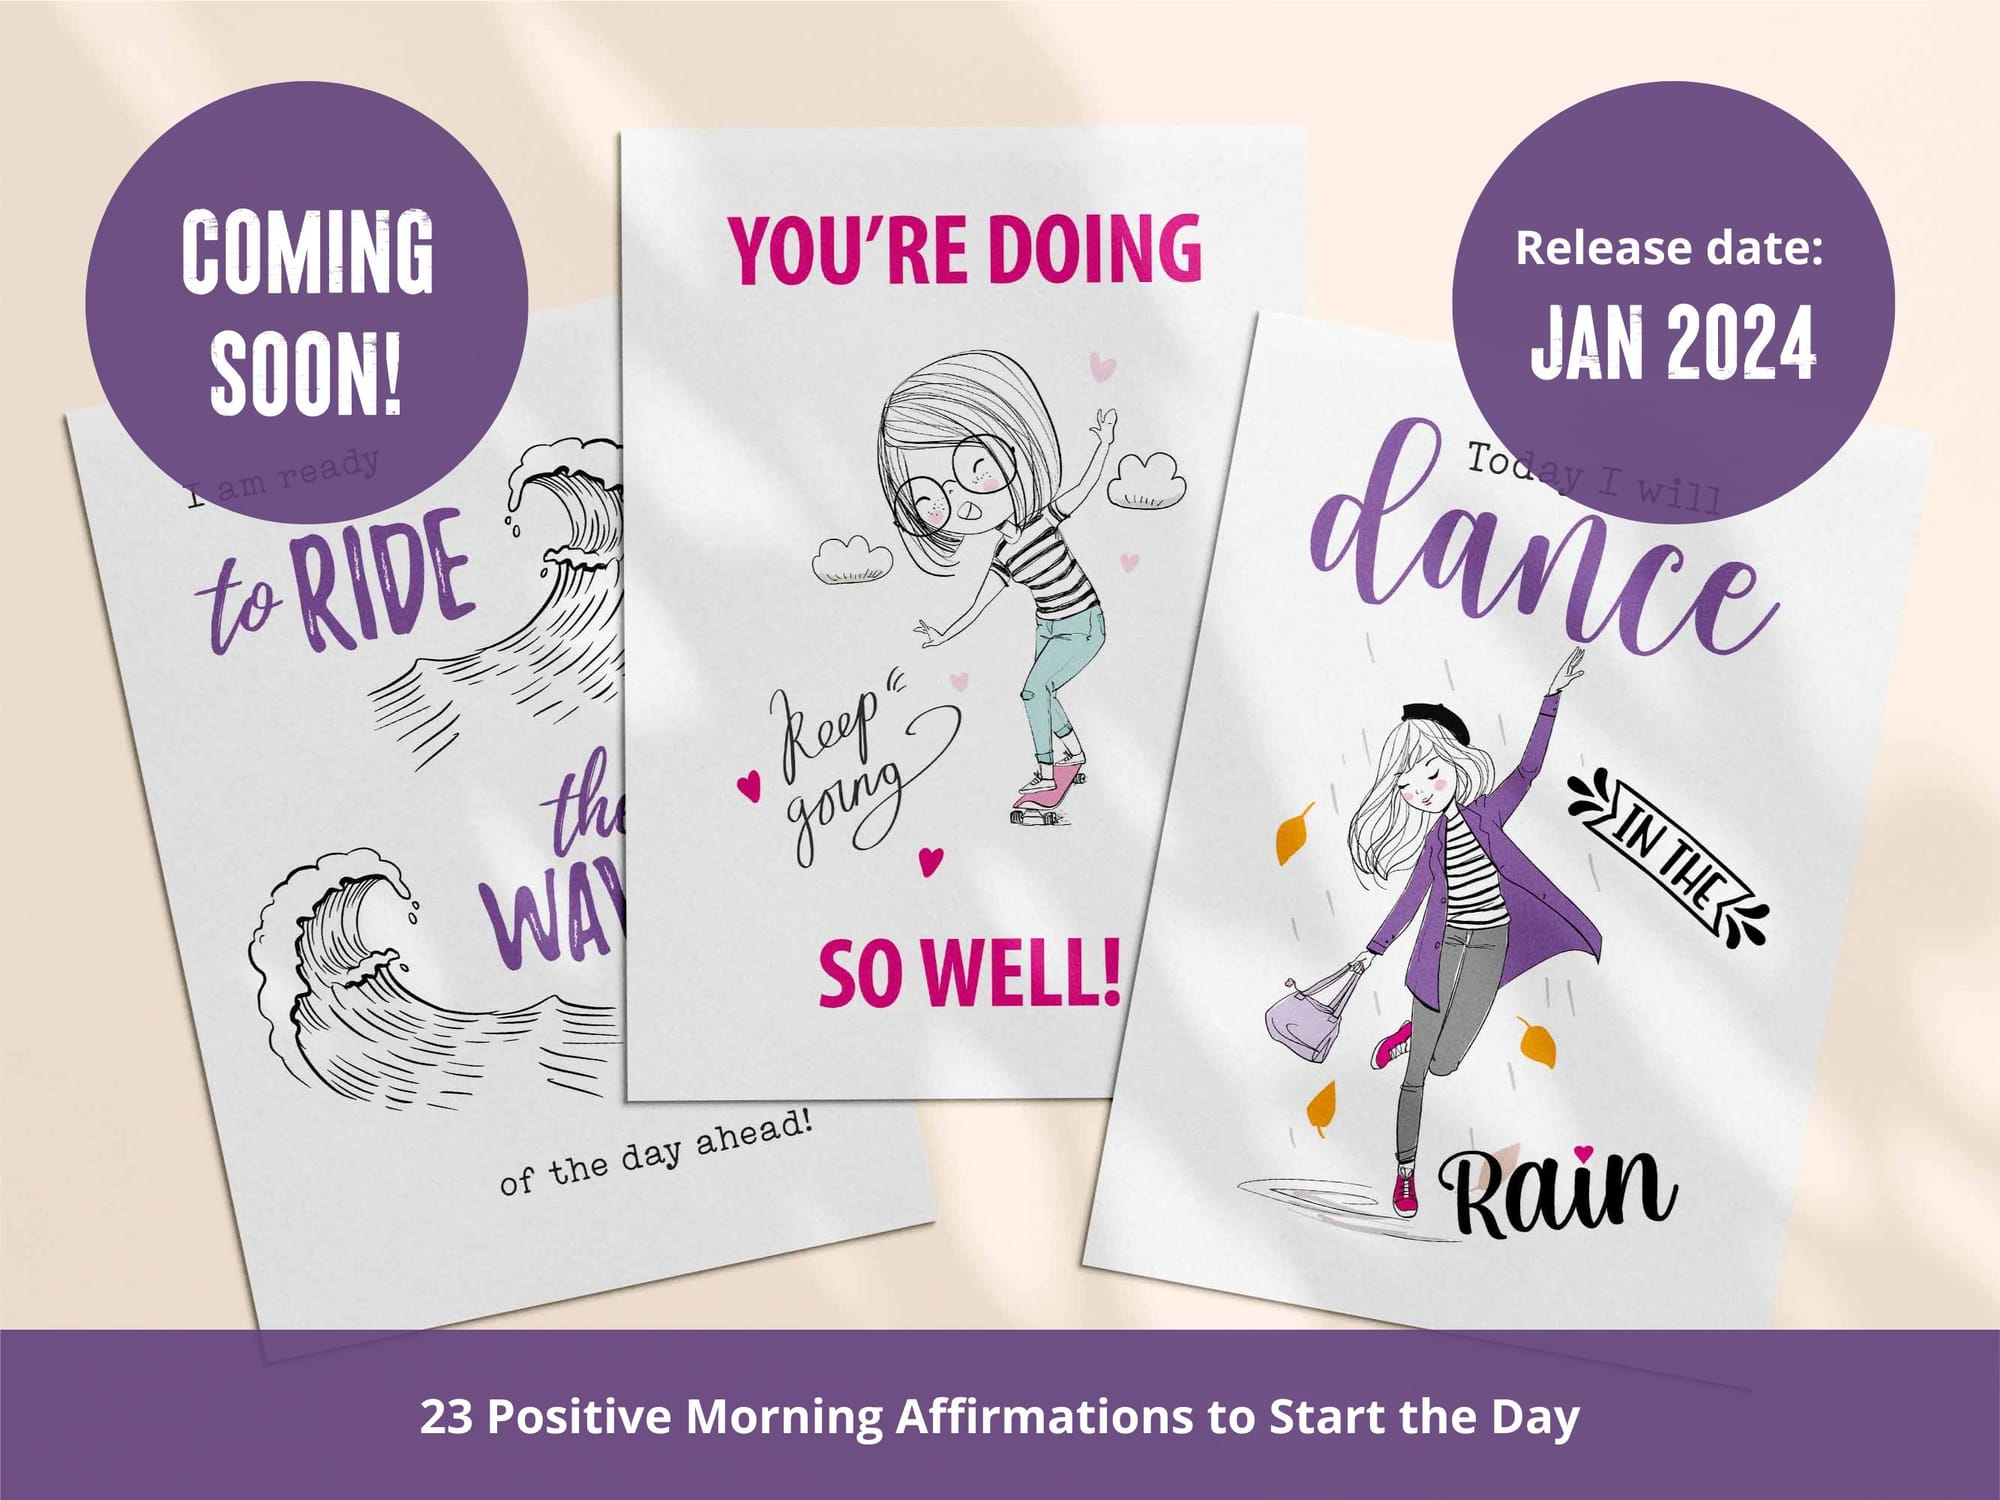 To be released in January 2024: 23 Printable morning affirmation cards to start the day.